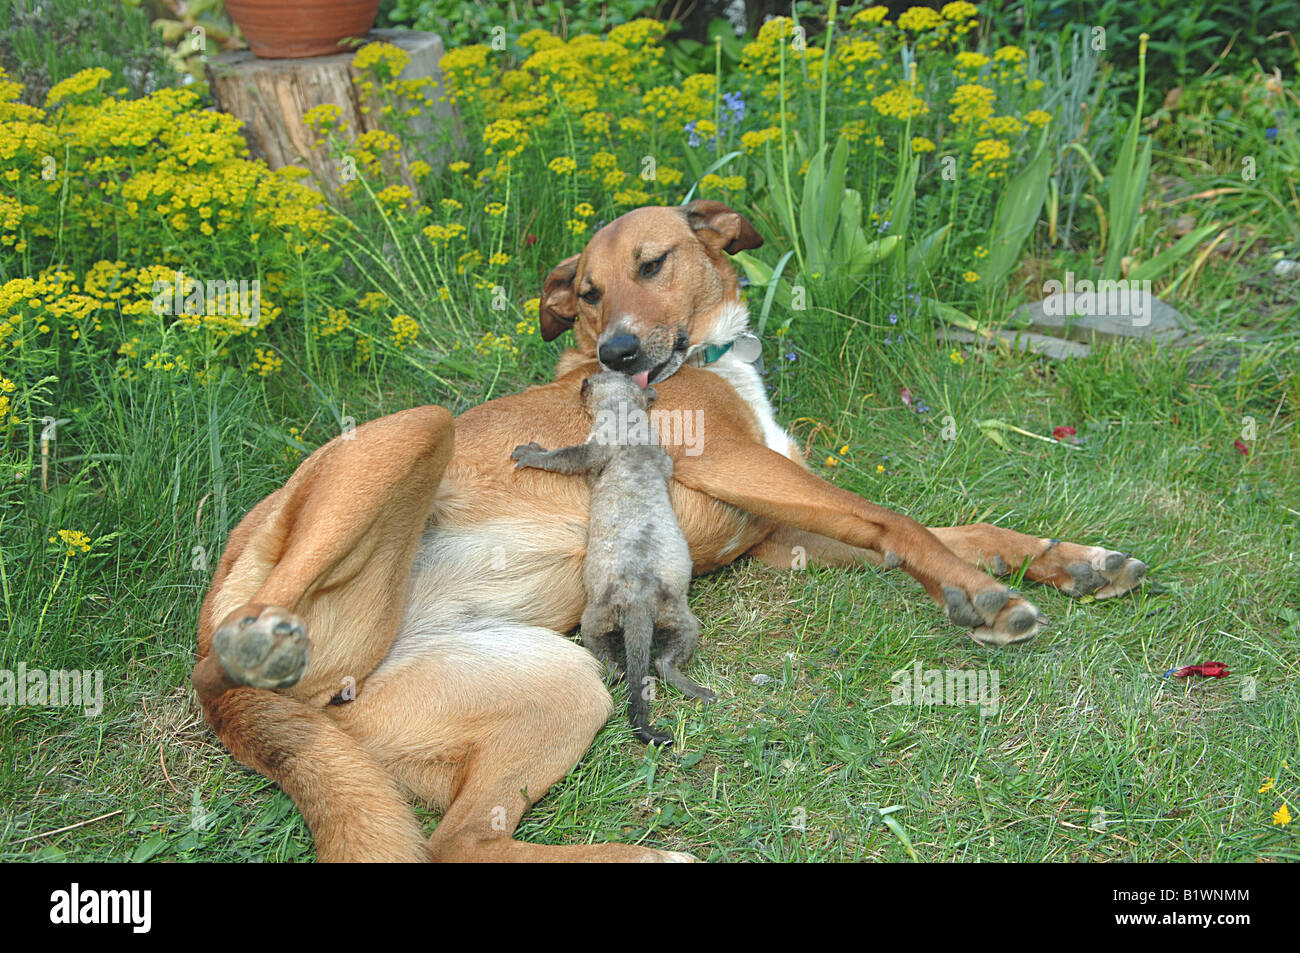 animal friendship: half breed dog and young beech marten Stock Photo